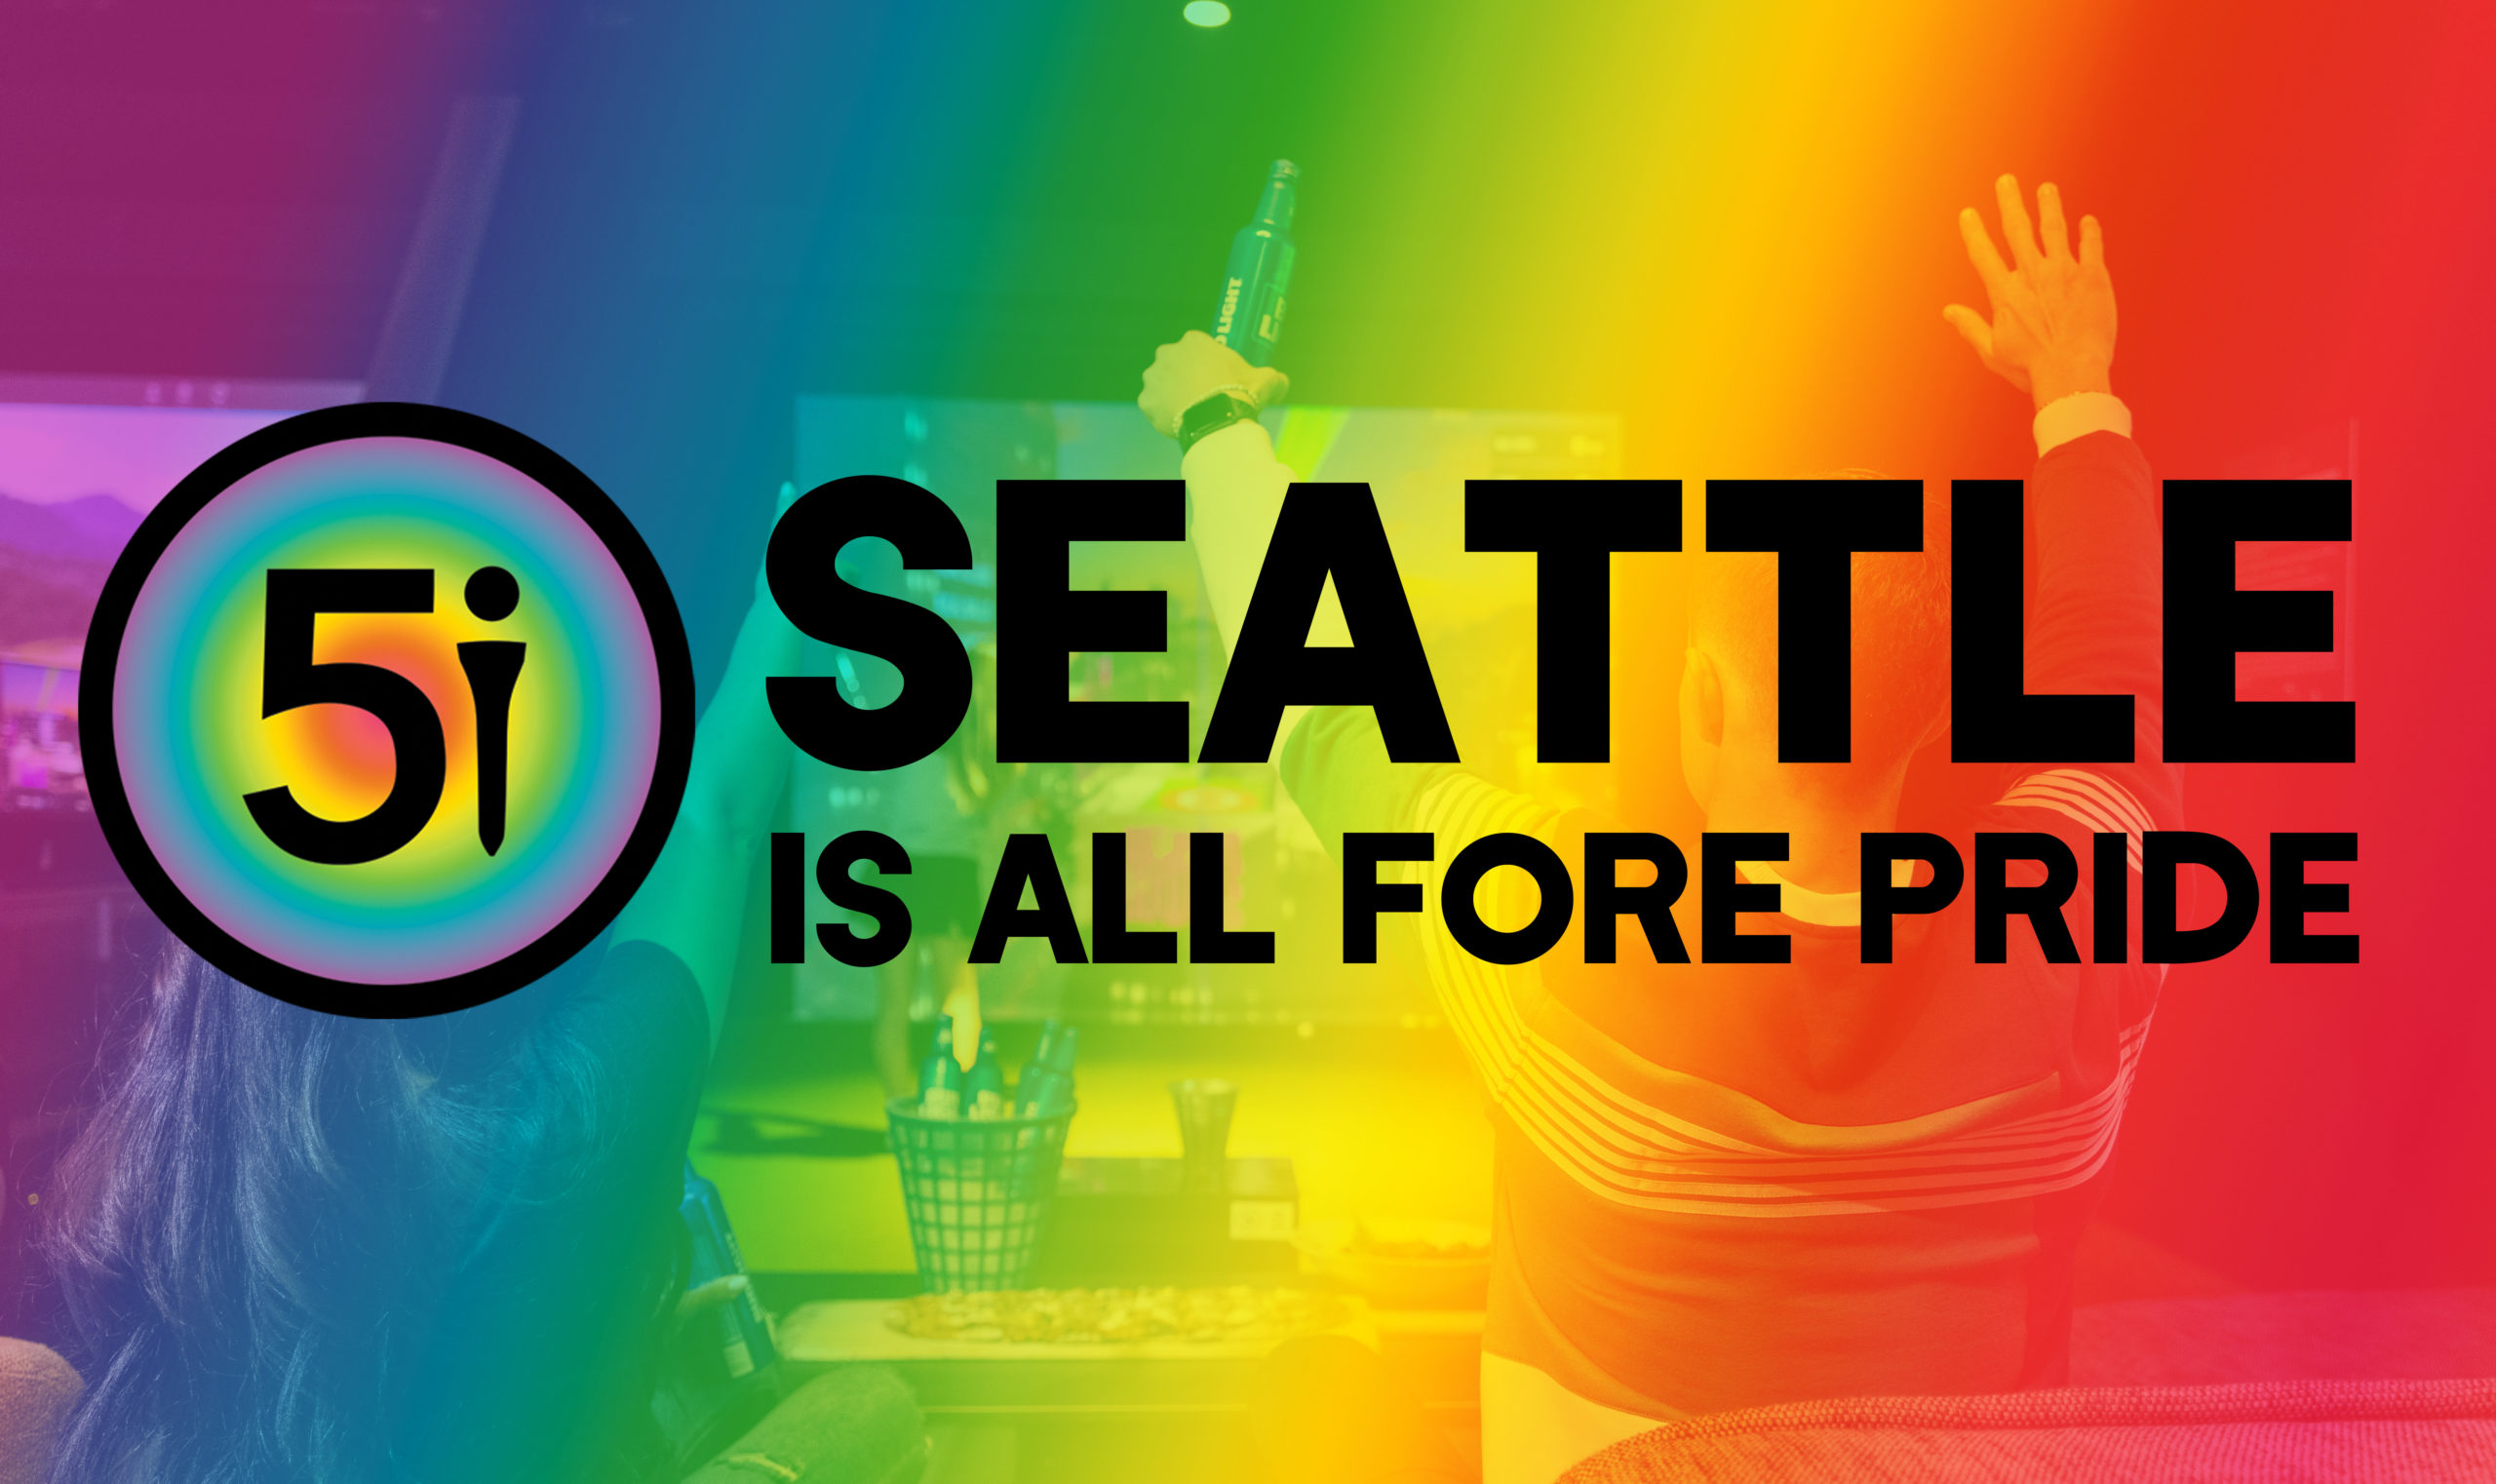 5i Seattle FORE Pride!